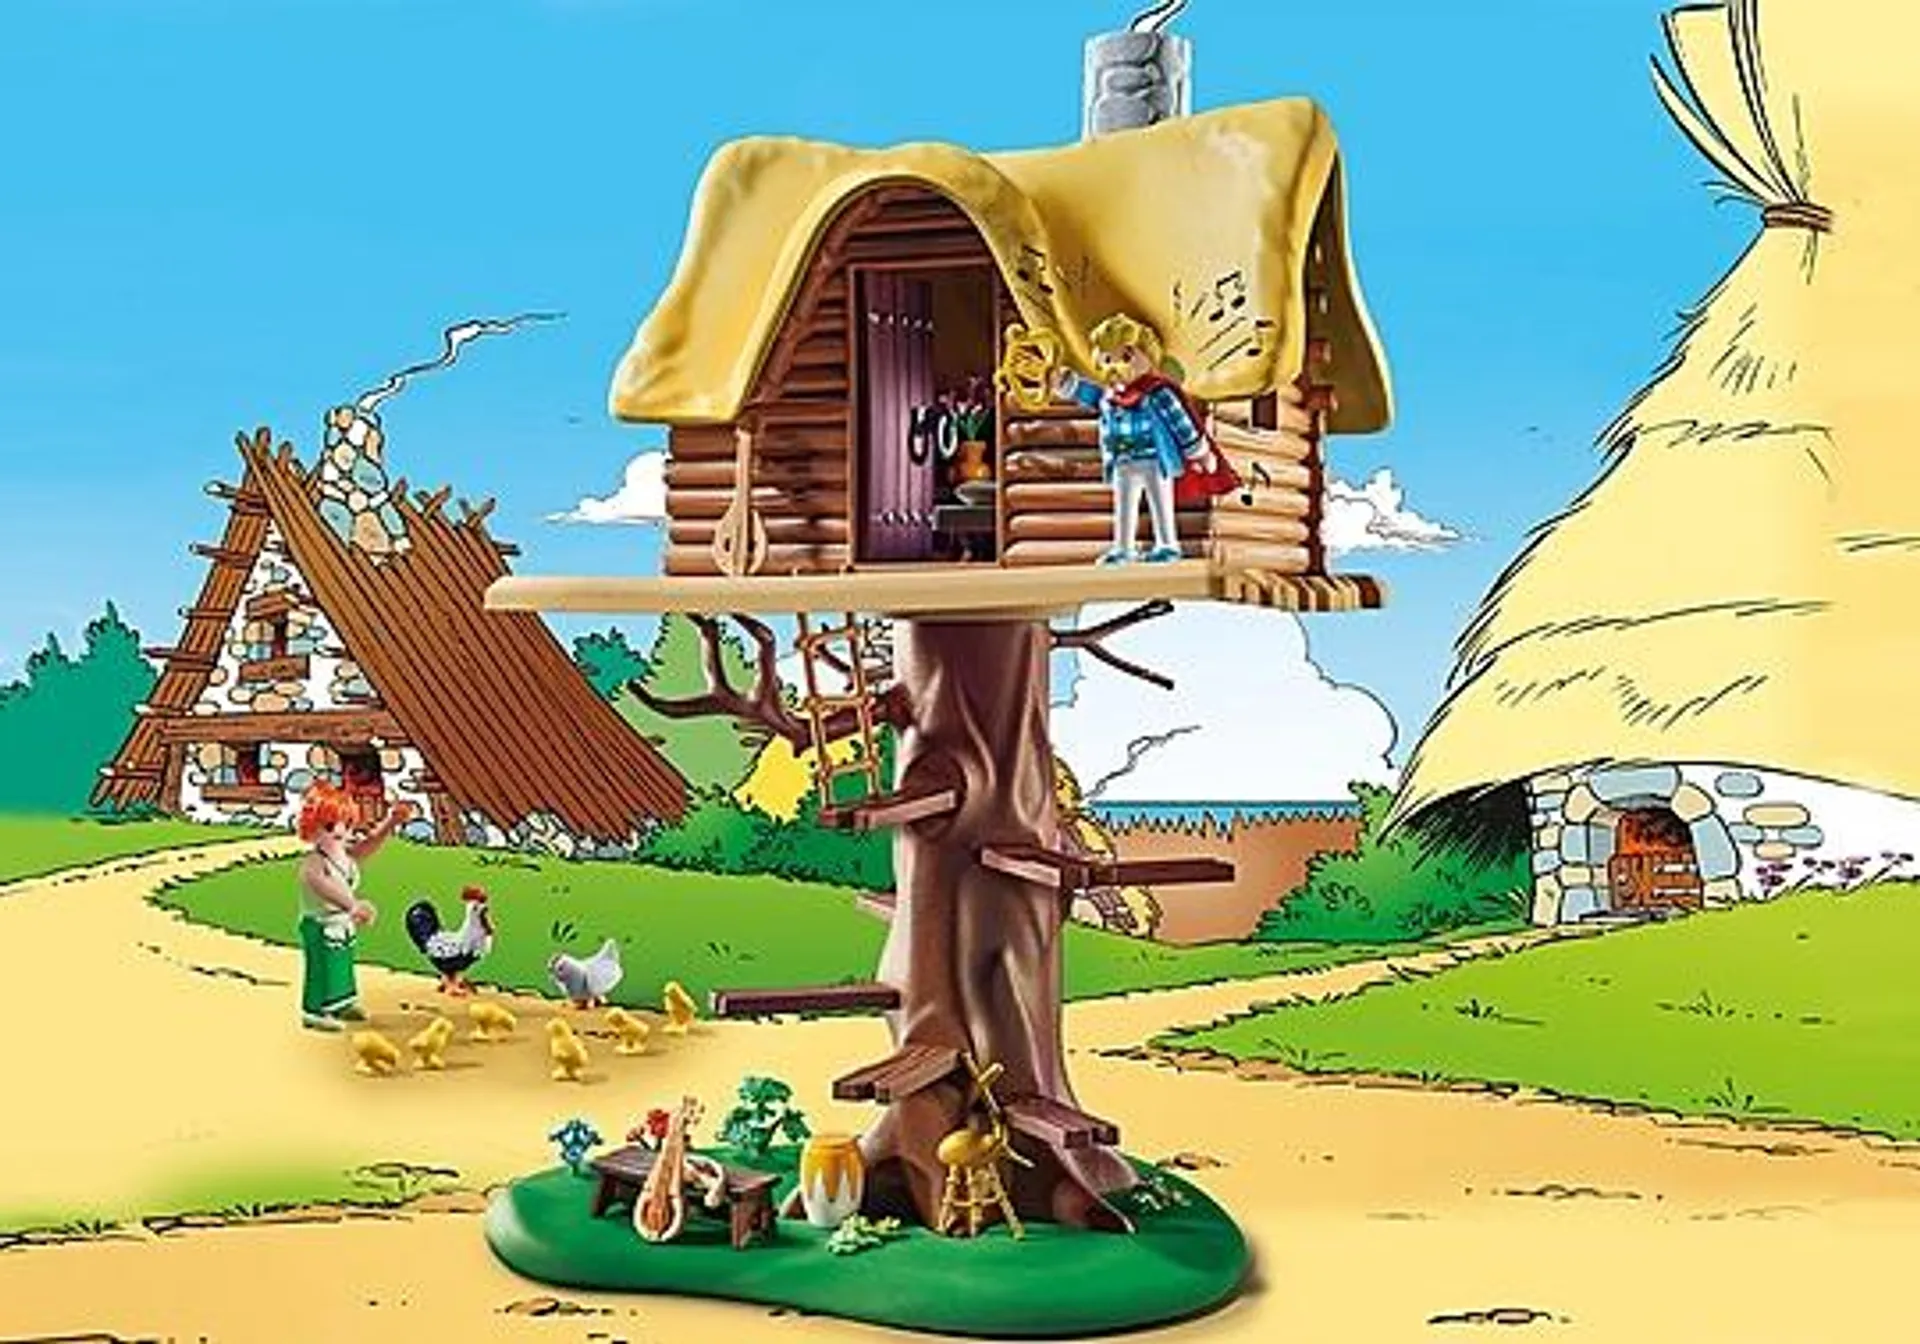 Asterix: Cacofonix with treehouse